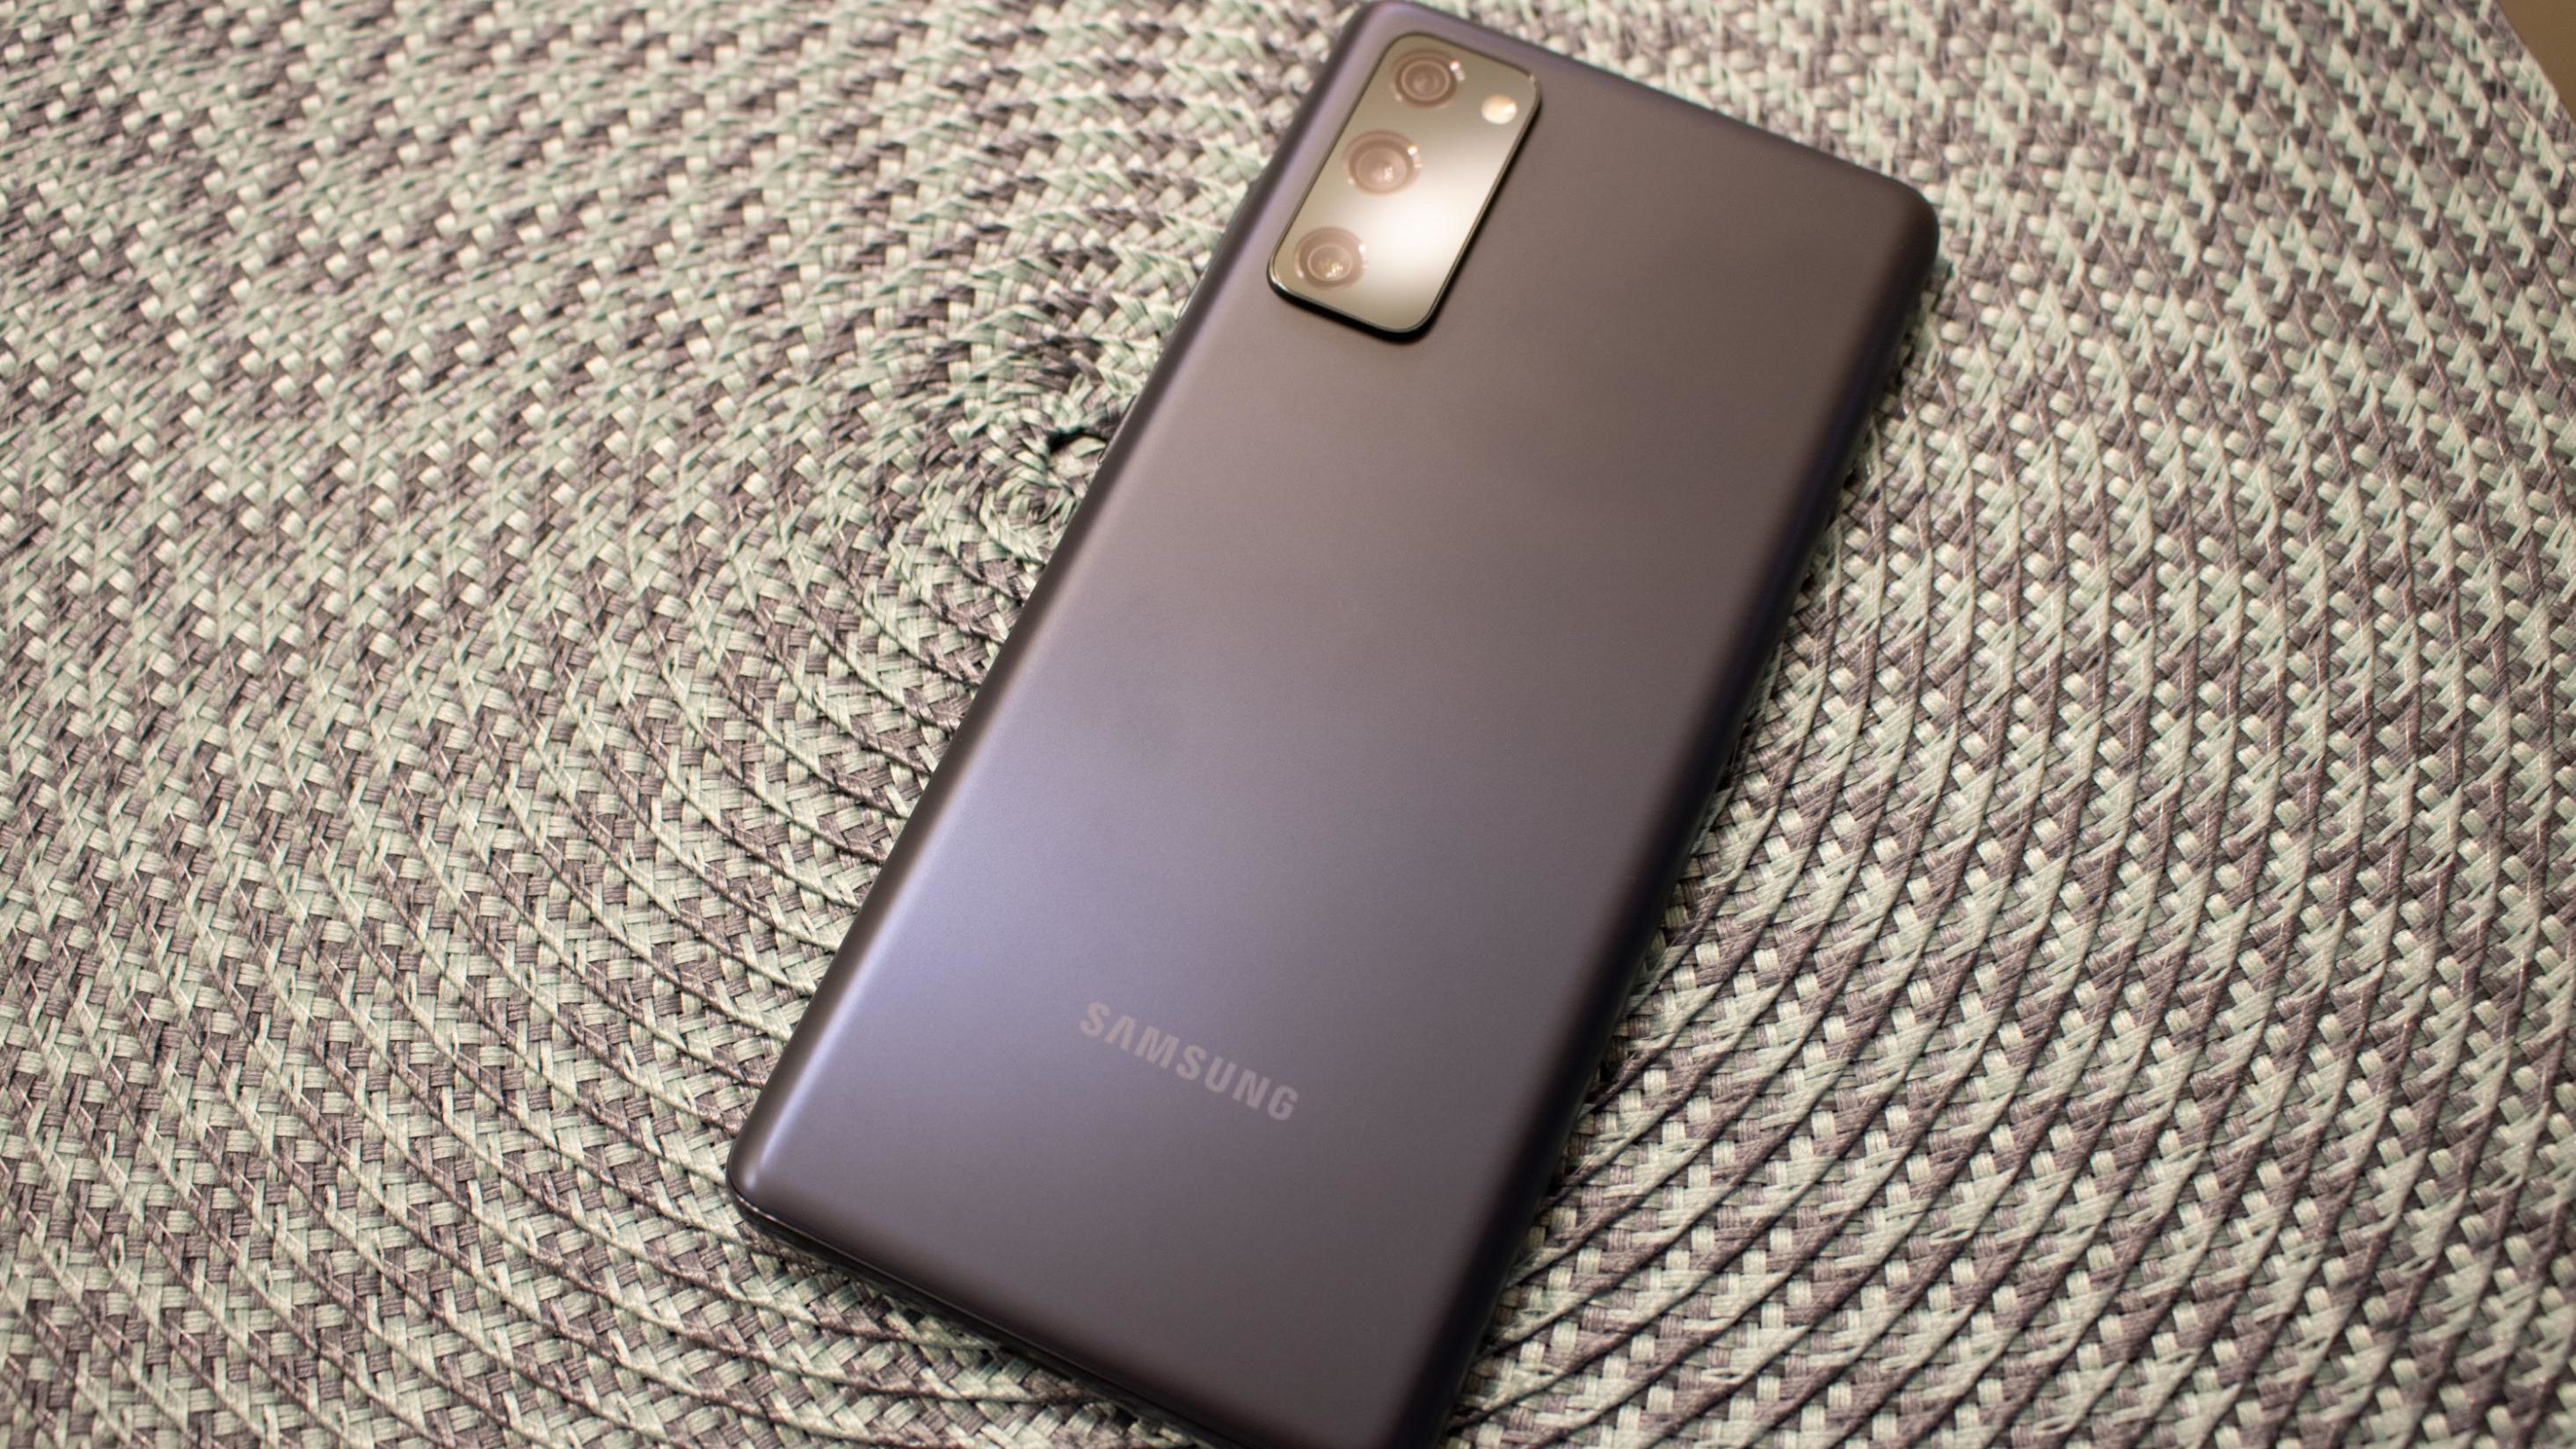 Samsung Galaxy S20 Ultra review -  tests